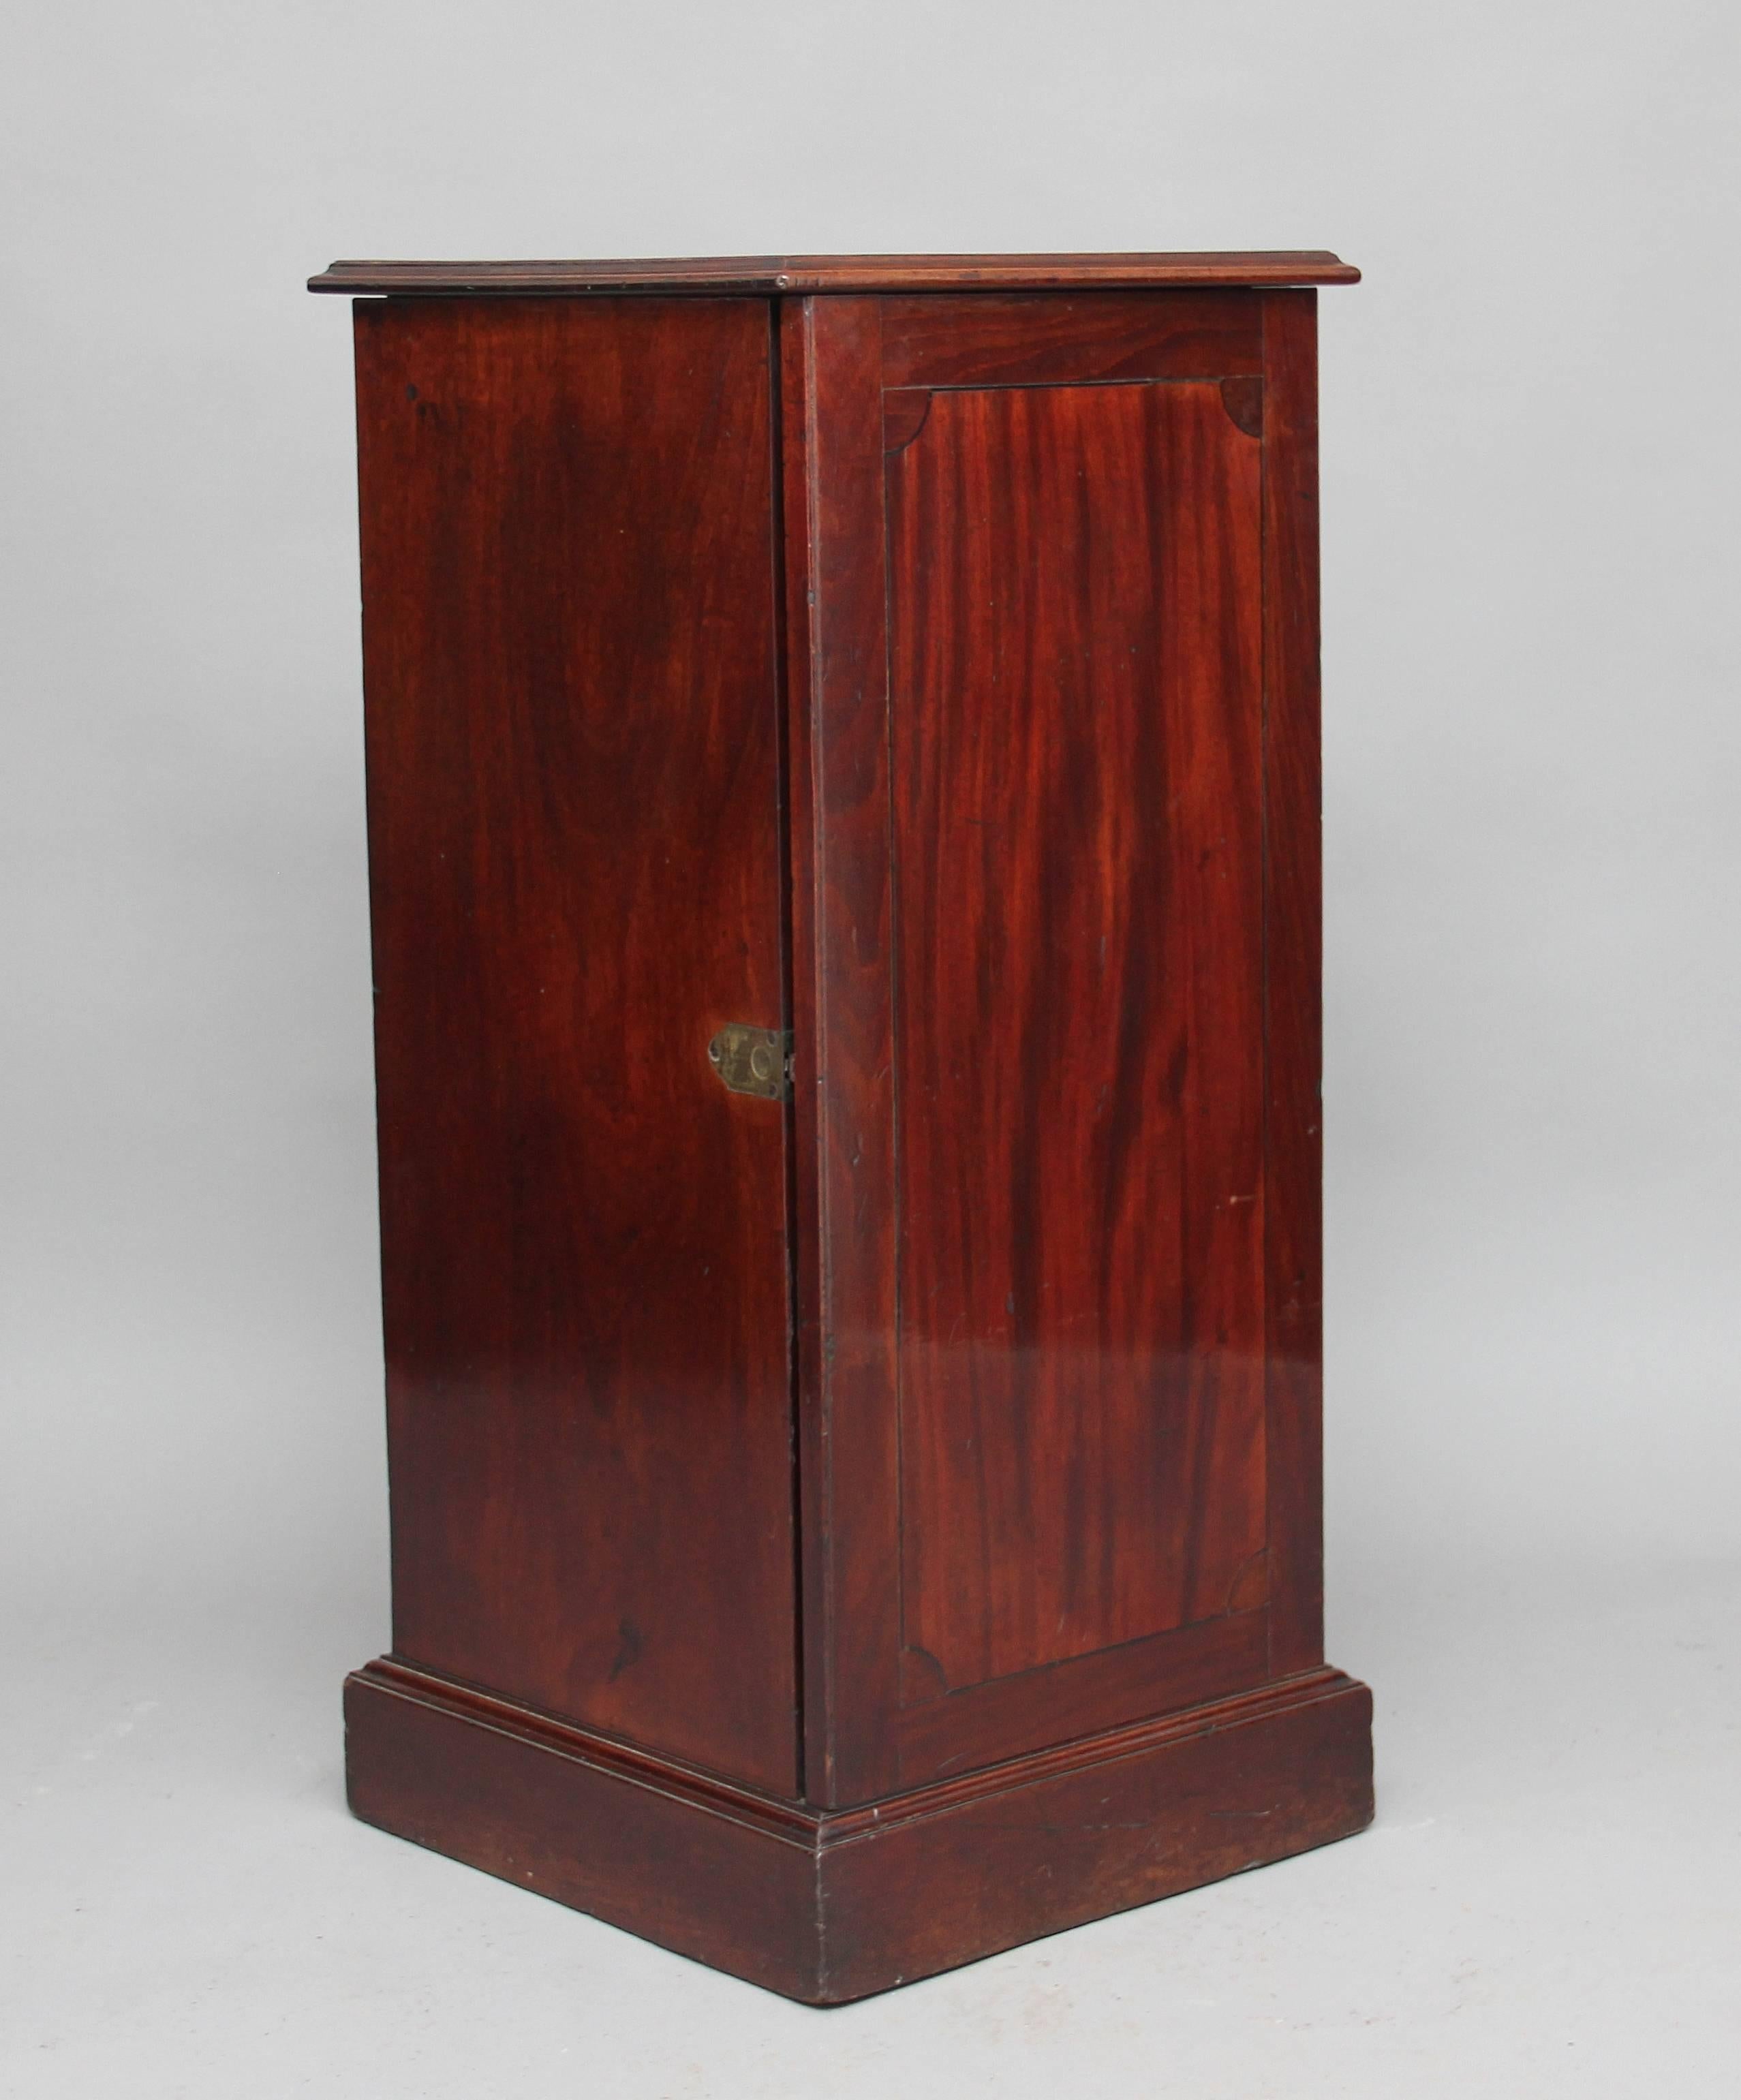 A very rare early 19th century mahogany wine cooler cabinet, the lift up hinged lid exposing a wine cooler, the door below opening to reveal a mahogany lined drawer in the centre with original brass swan neck handle and a cupboard below, circa